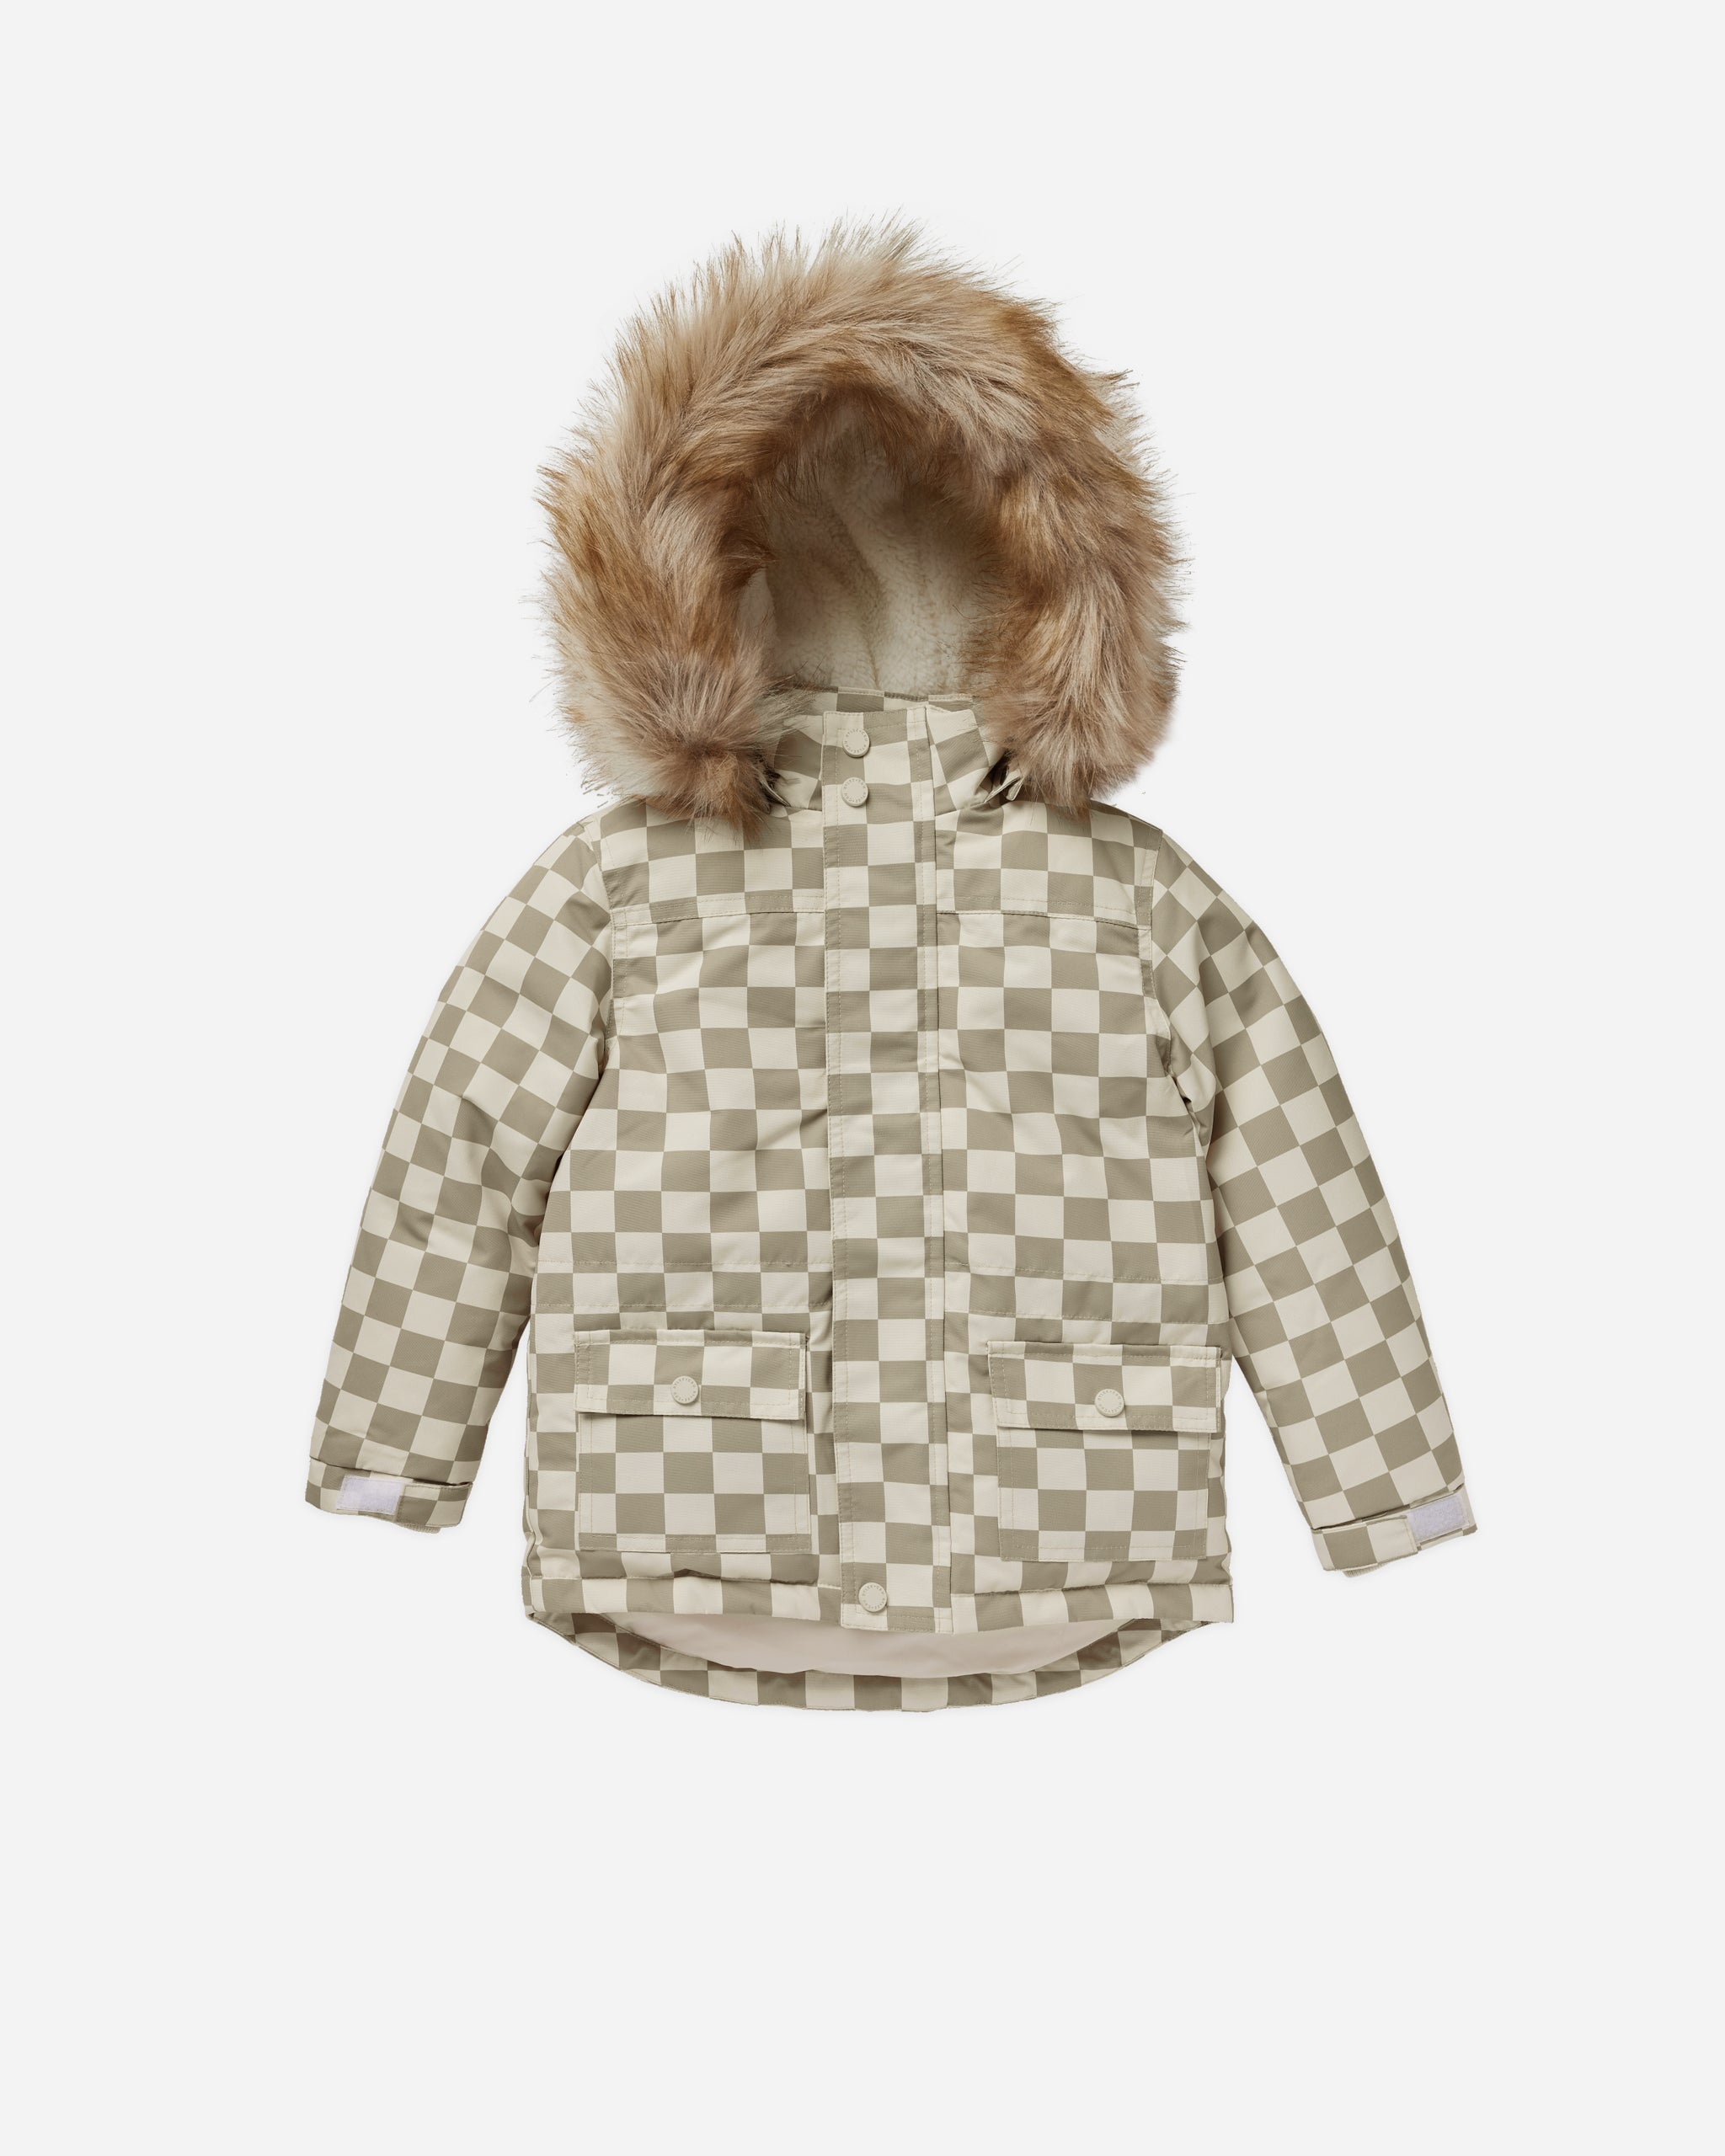 Parka Ski Jacket | Fern Check - Rylee + Cru | Kids Clothes | Trendy Baby Clothes | Modern Infant Outfits |